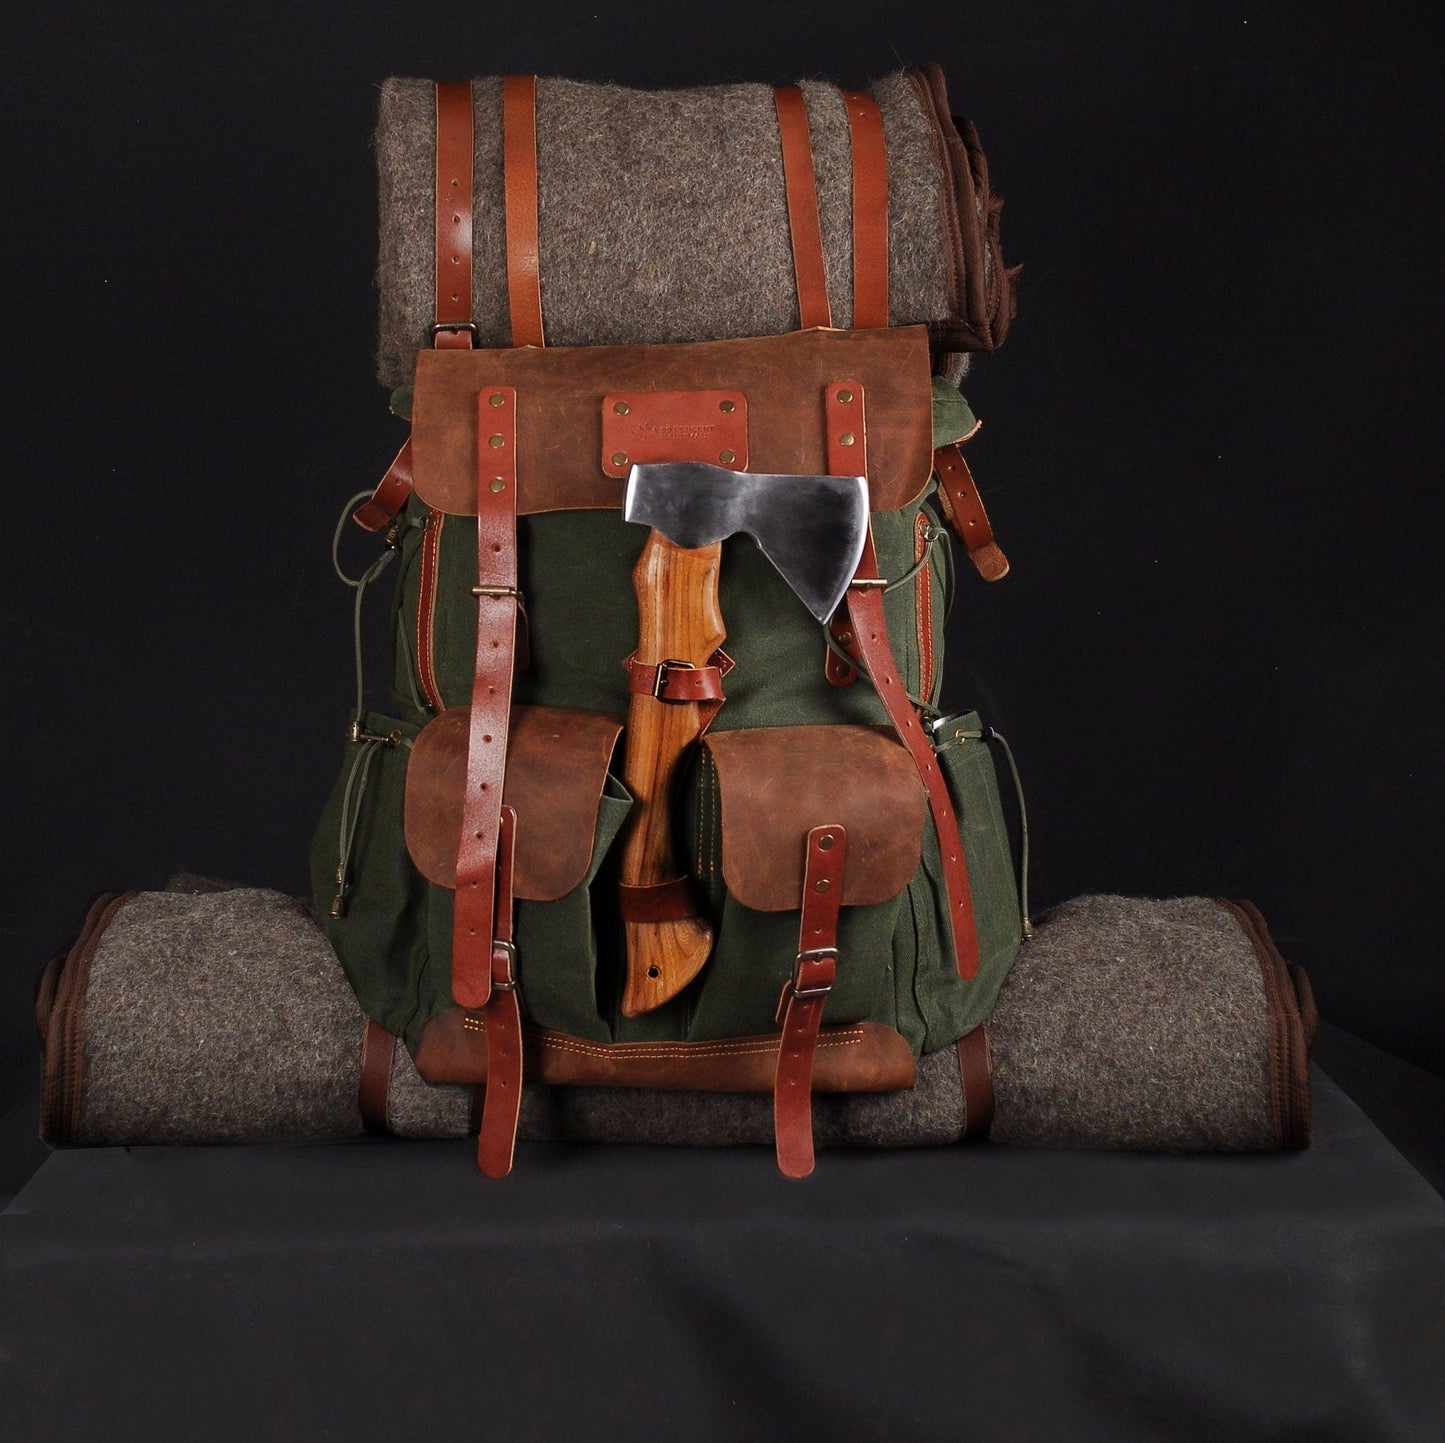 Bushcraft Backpack with Axe Holder | Handmade | Leather | Waxed Canvas Backpack | Camping, Hunting, Bushcraft, Travel  | Personalization bushcraft - camping - hiking backpack 99percenthandmade 30 Green 